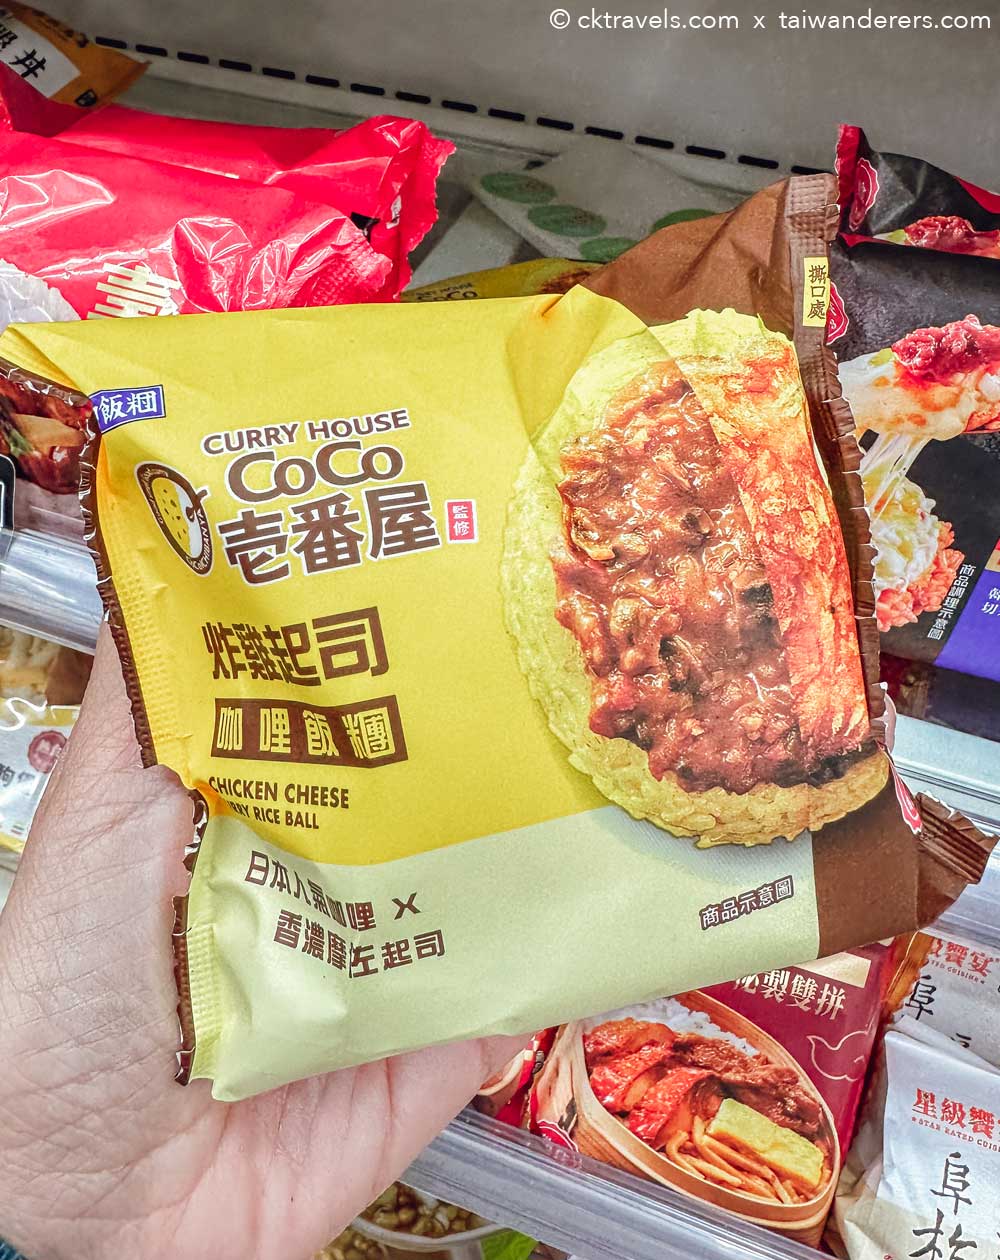 coco curry house chicekn cheese curry rice ball 7 eleven Taiwan